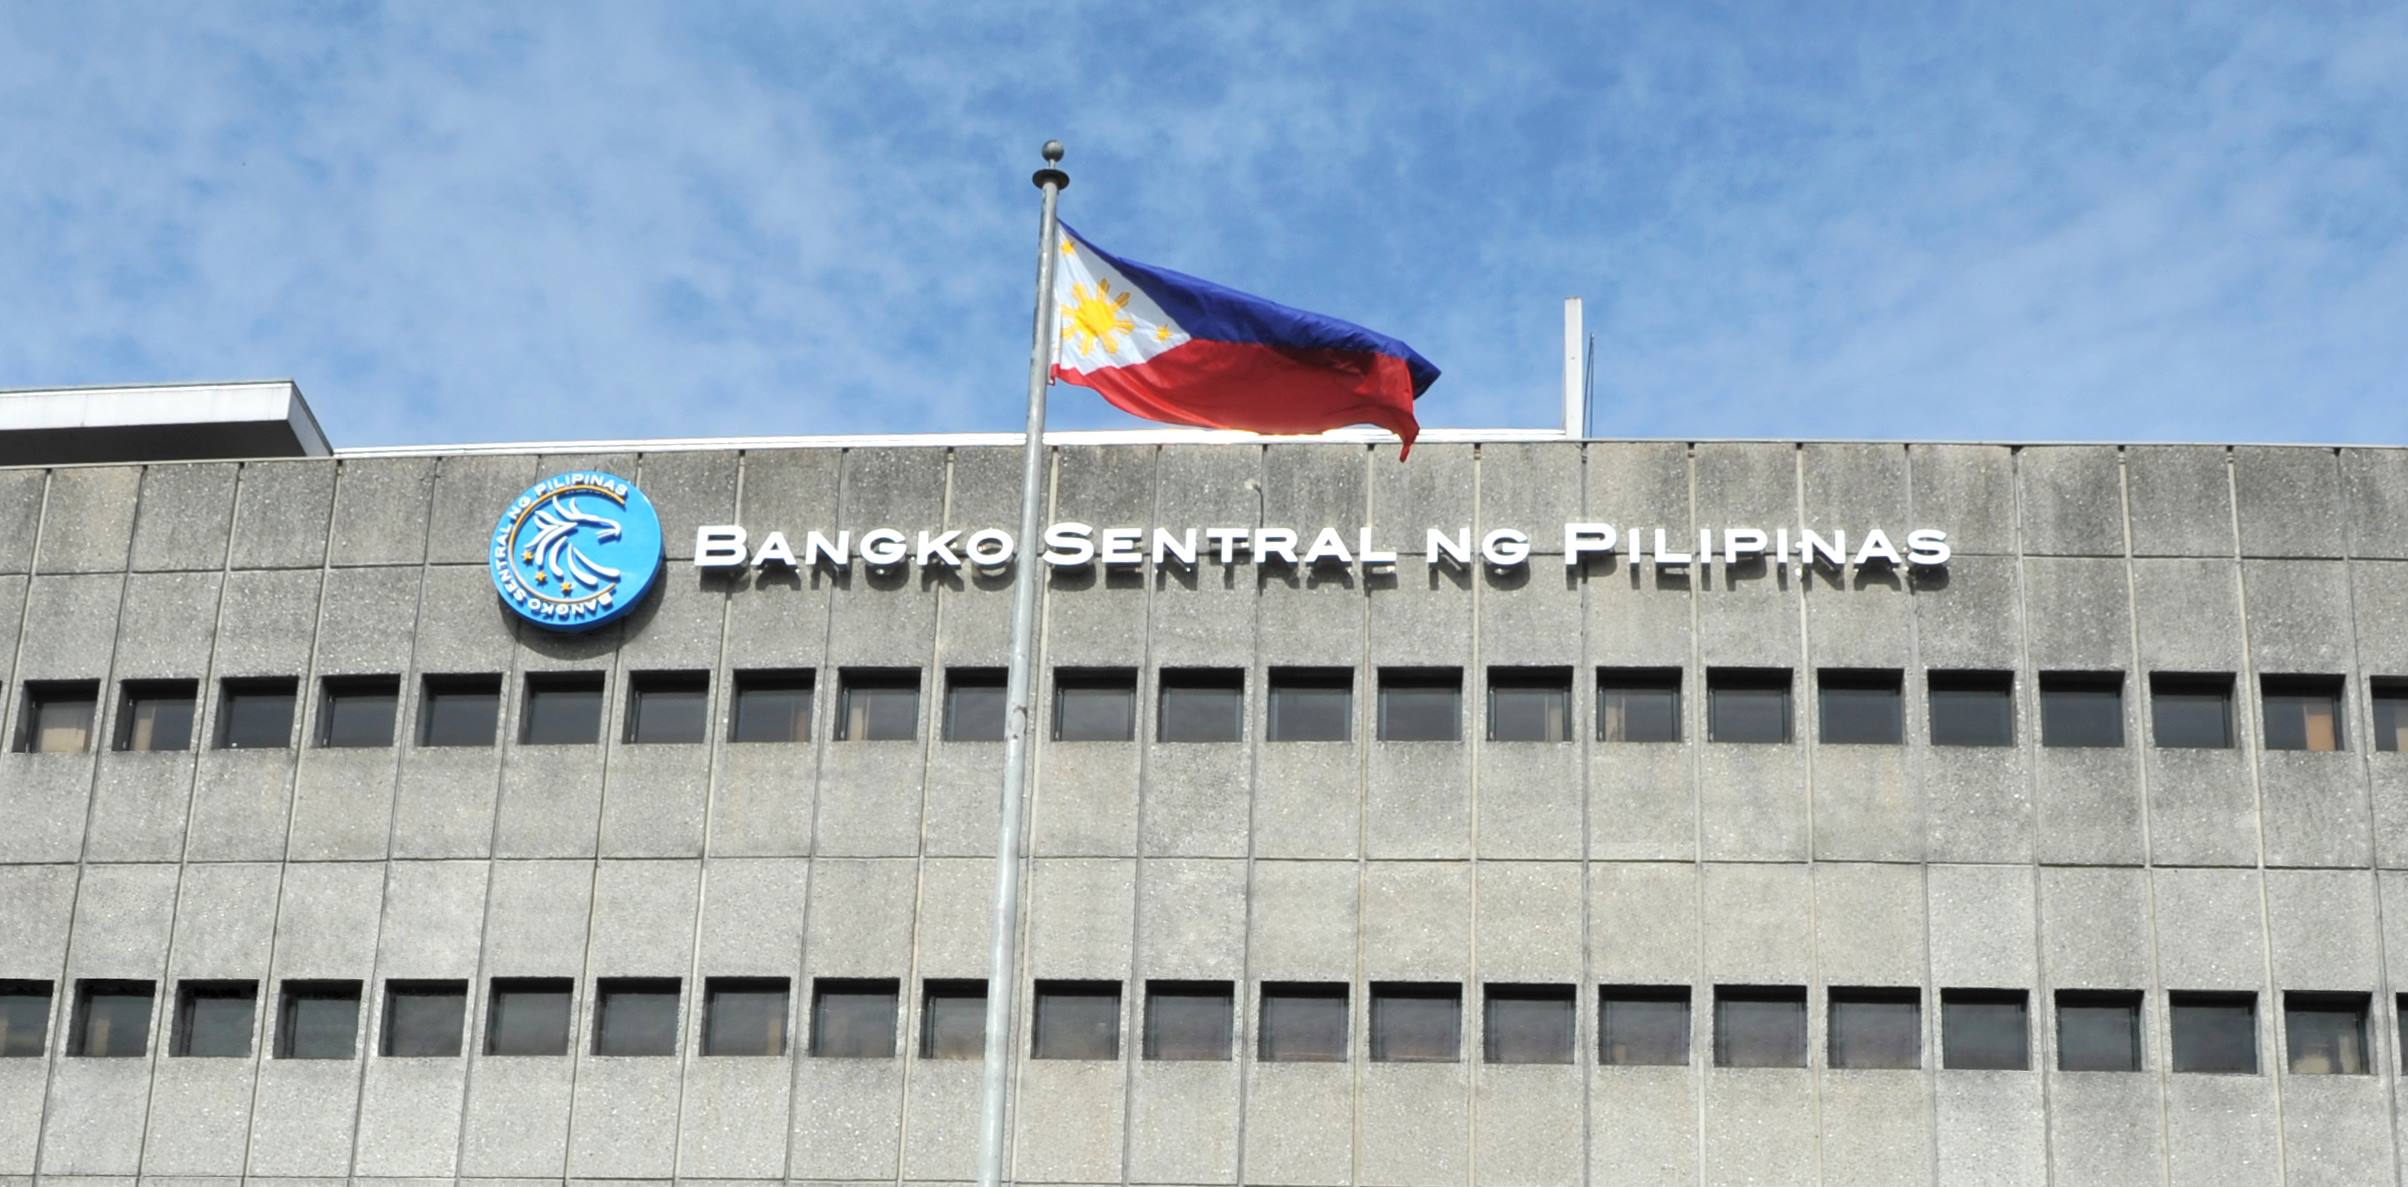 Transact only with registered payment system operators, BSP tells public